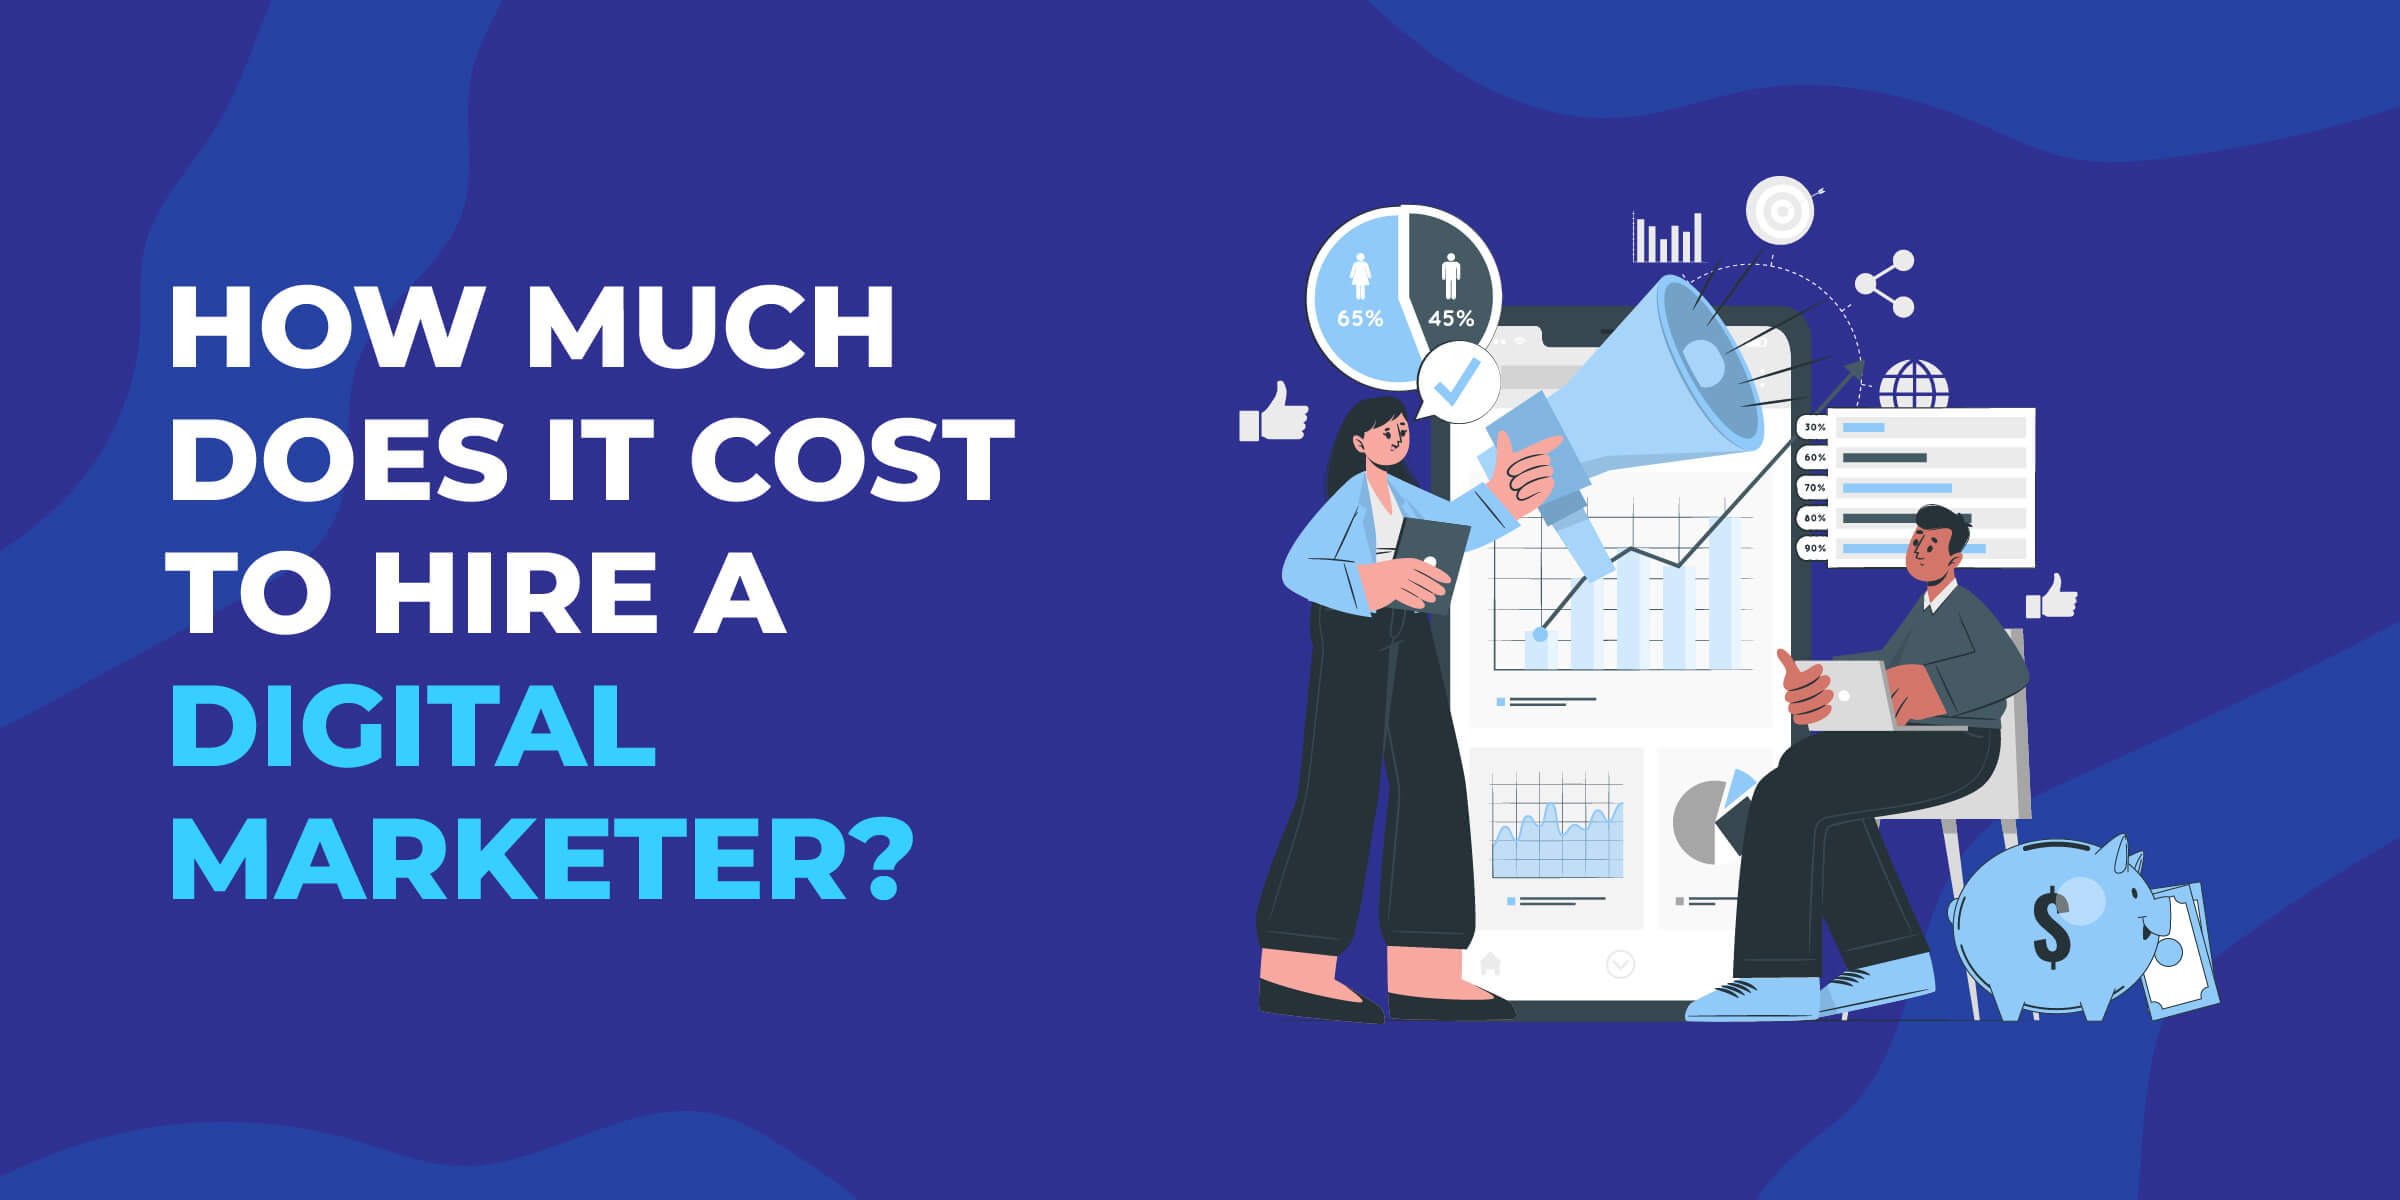 How Much Does It Cost to Hire a Digital Marketer